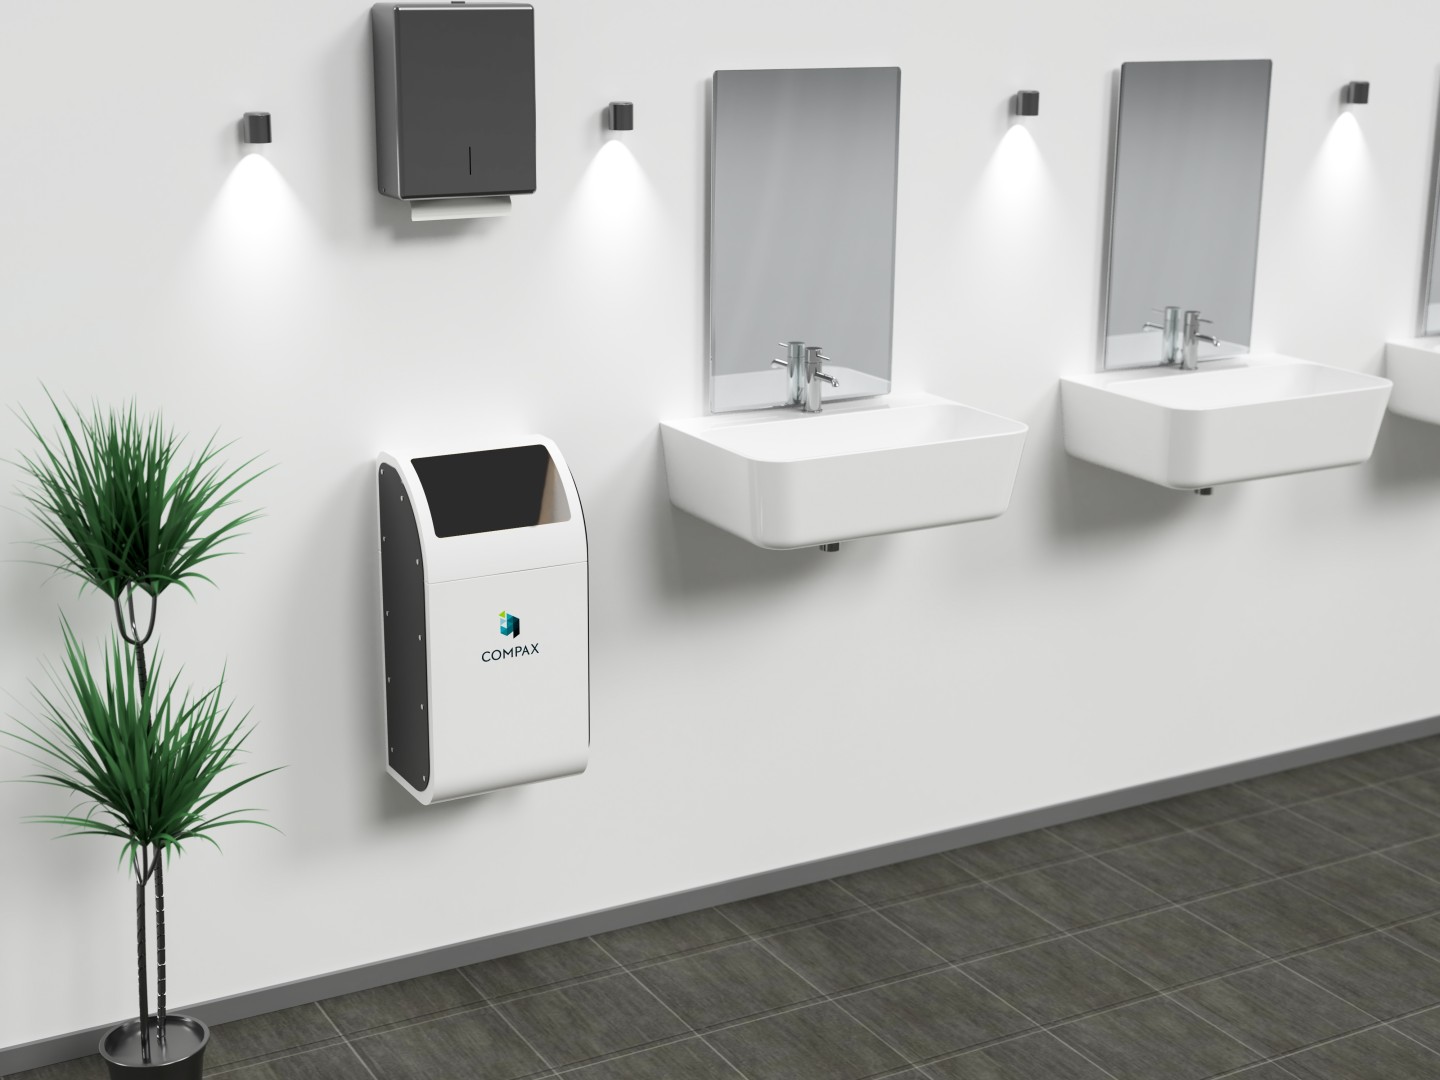 Image of bathroom interior with Compax waste container